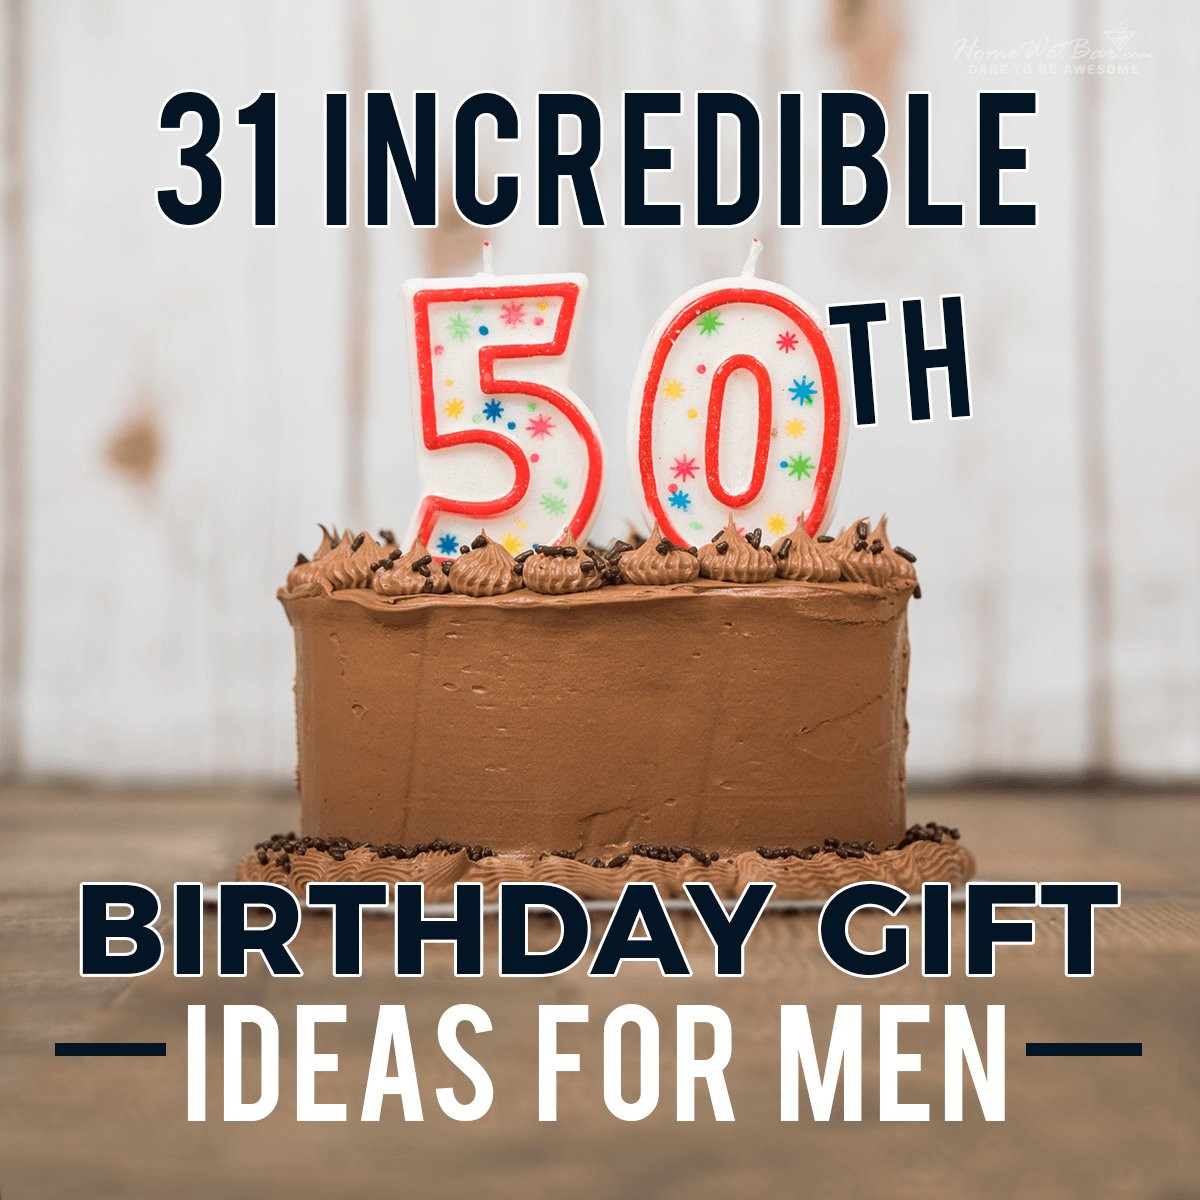 50 Birthday Gift
 31 Incredible 50th Birthday Gift Ideas for Men